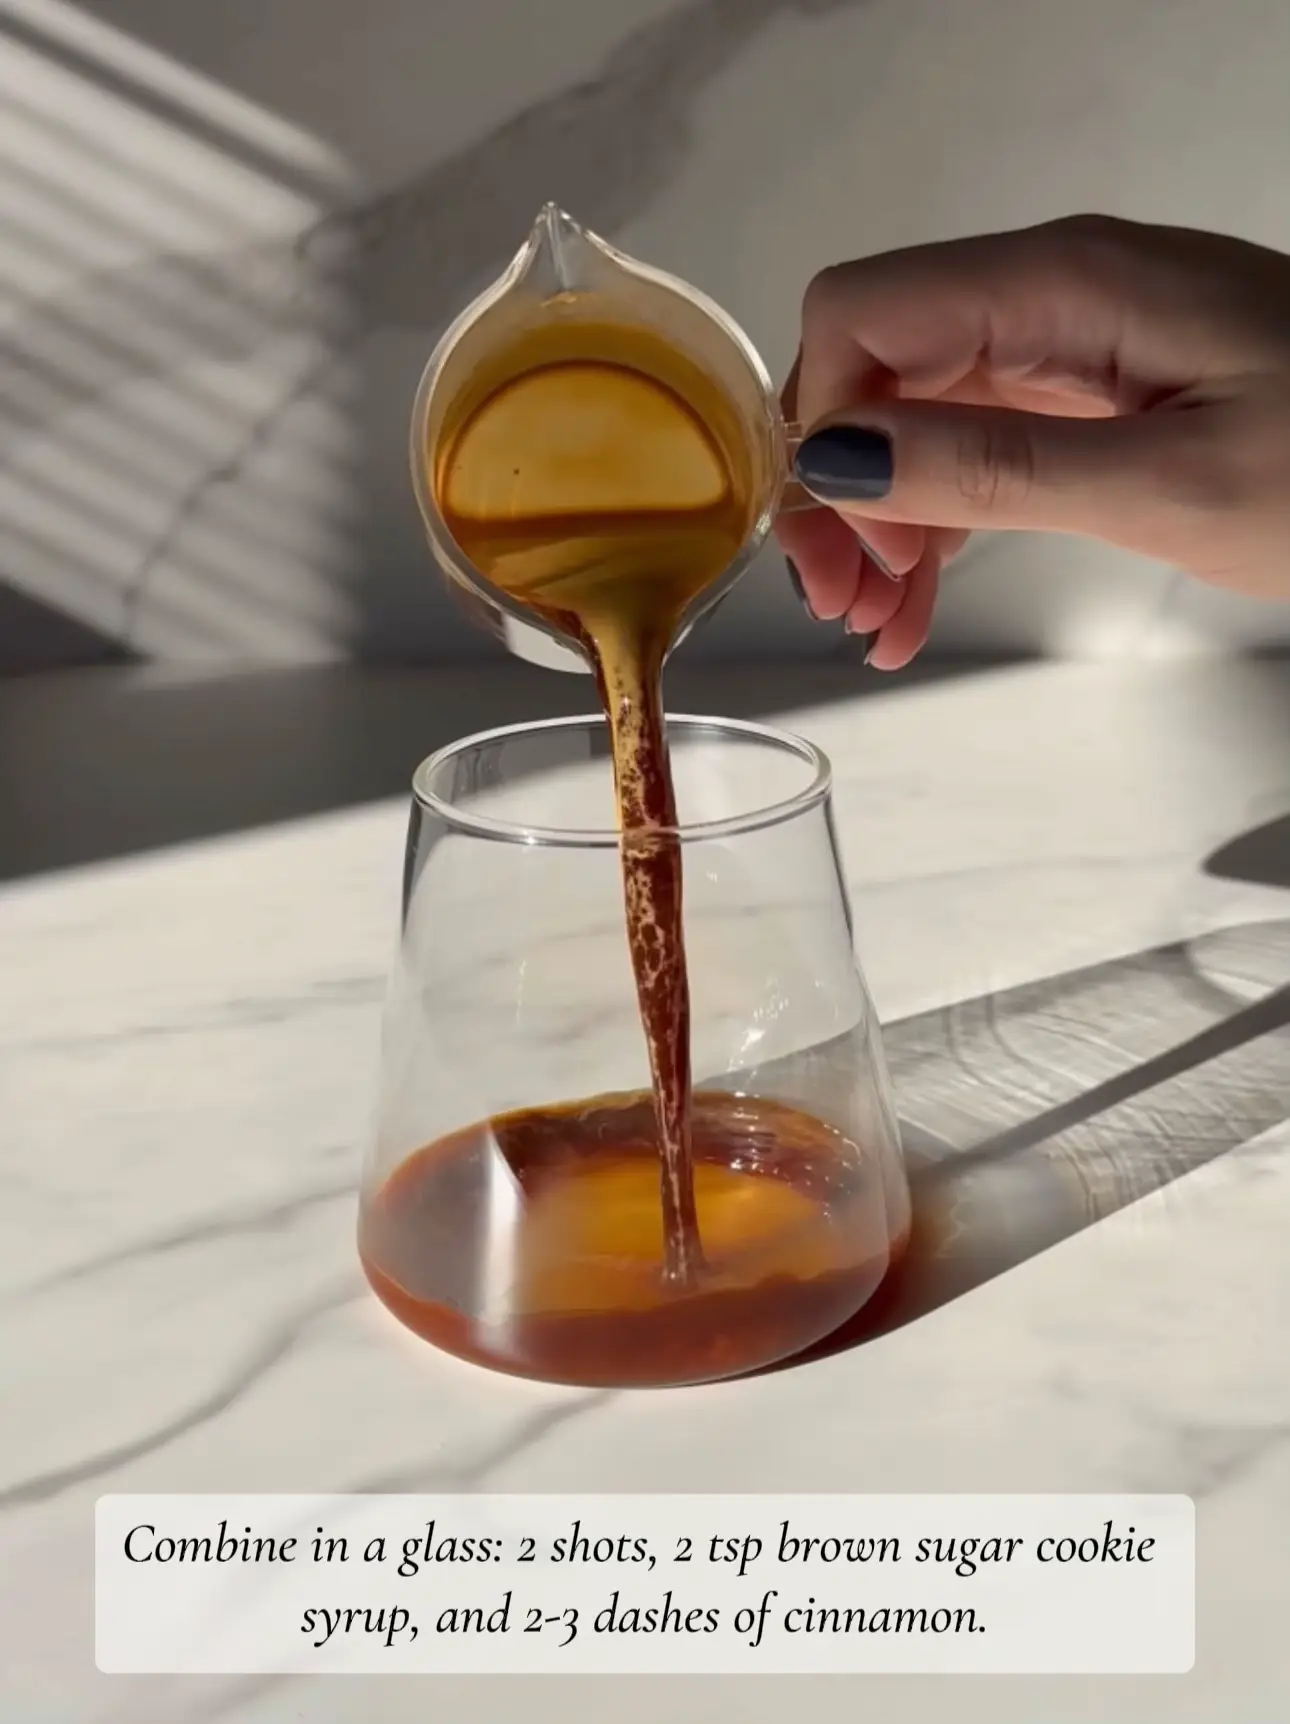  A person is holding a glass with a spoon in it. The glass contains brown sugar cookie syrup and cinnamon